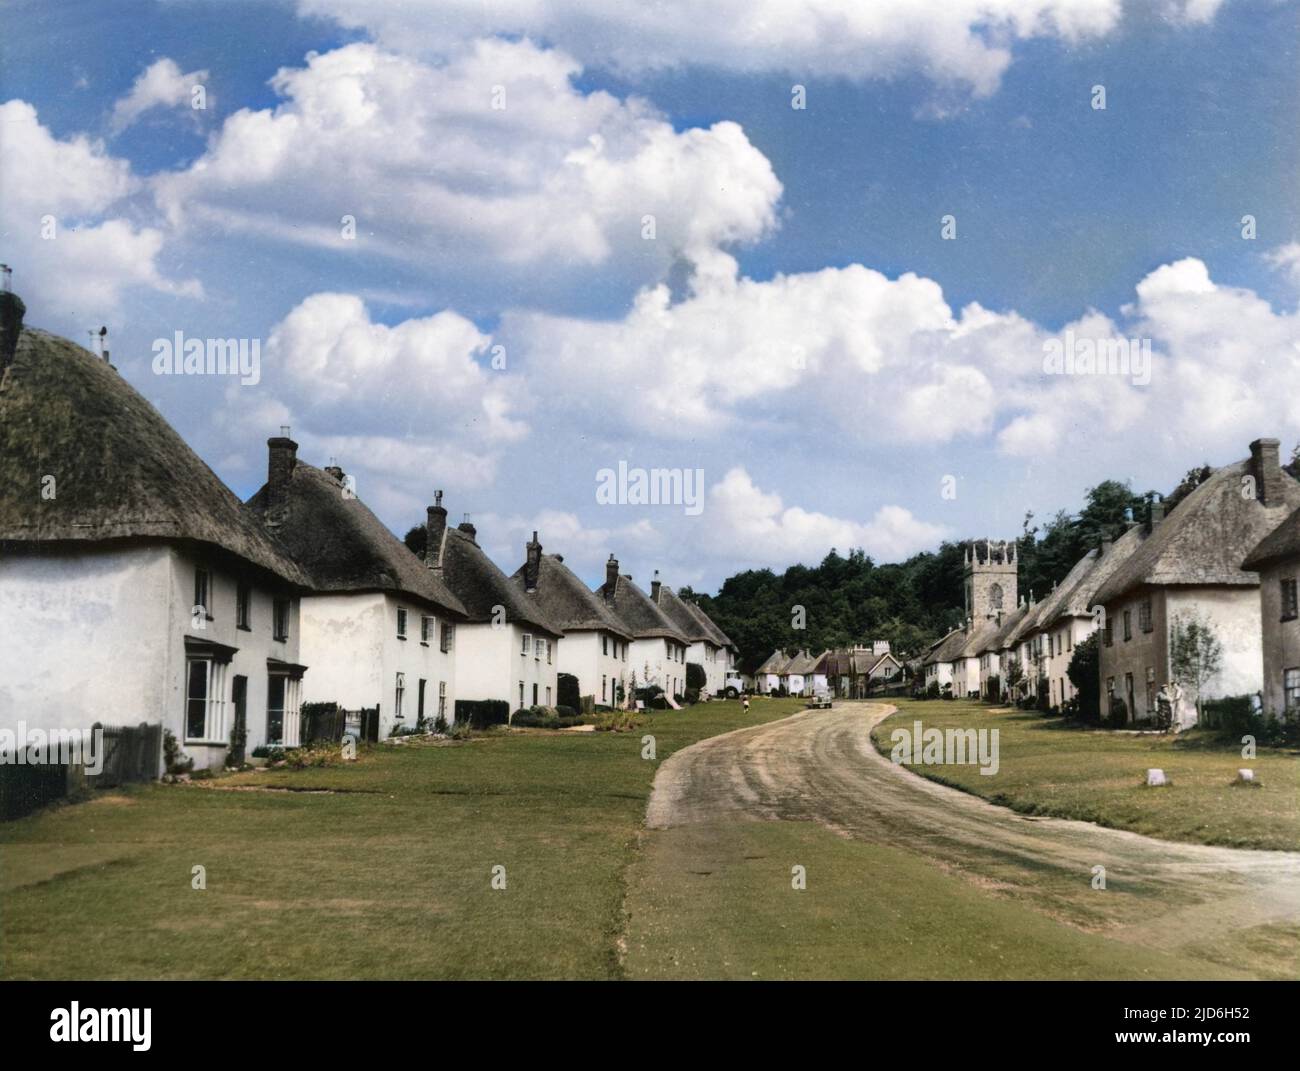 The distinctive charm of the village street of Milton Abbas, Dorset. Built in the 1780s by Sir William Chambers at the request of Lord Milton; an early English model village Colourised version of : 10187998       Date: 1950s Stock Photo